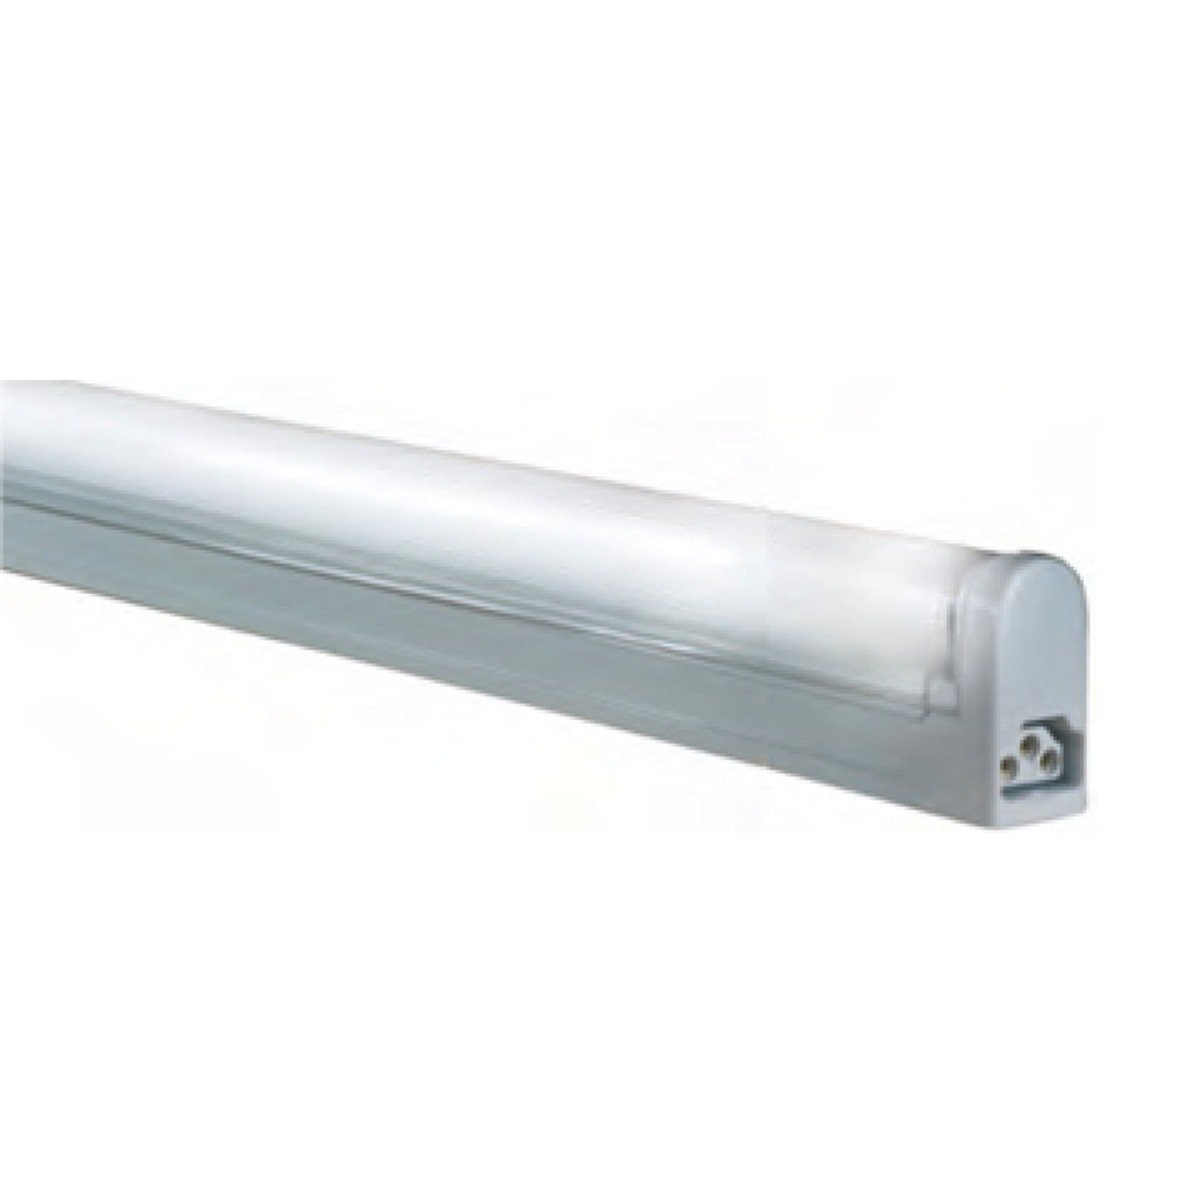 Picture of Jesco Lighting SG4-8-64-W T4 Sleek Plus Fluorescent Undercabinet Fixture without Rocker Switch - White